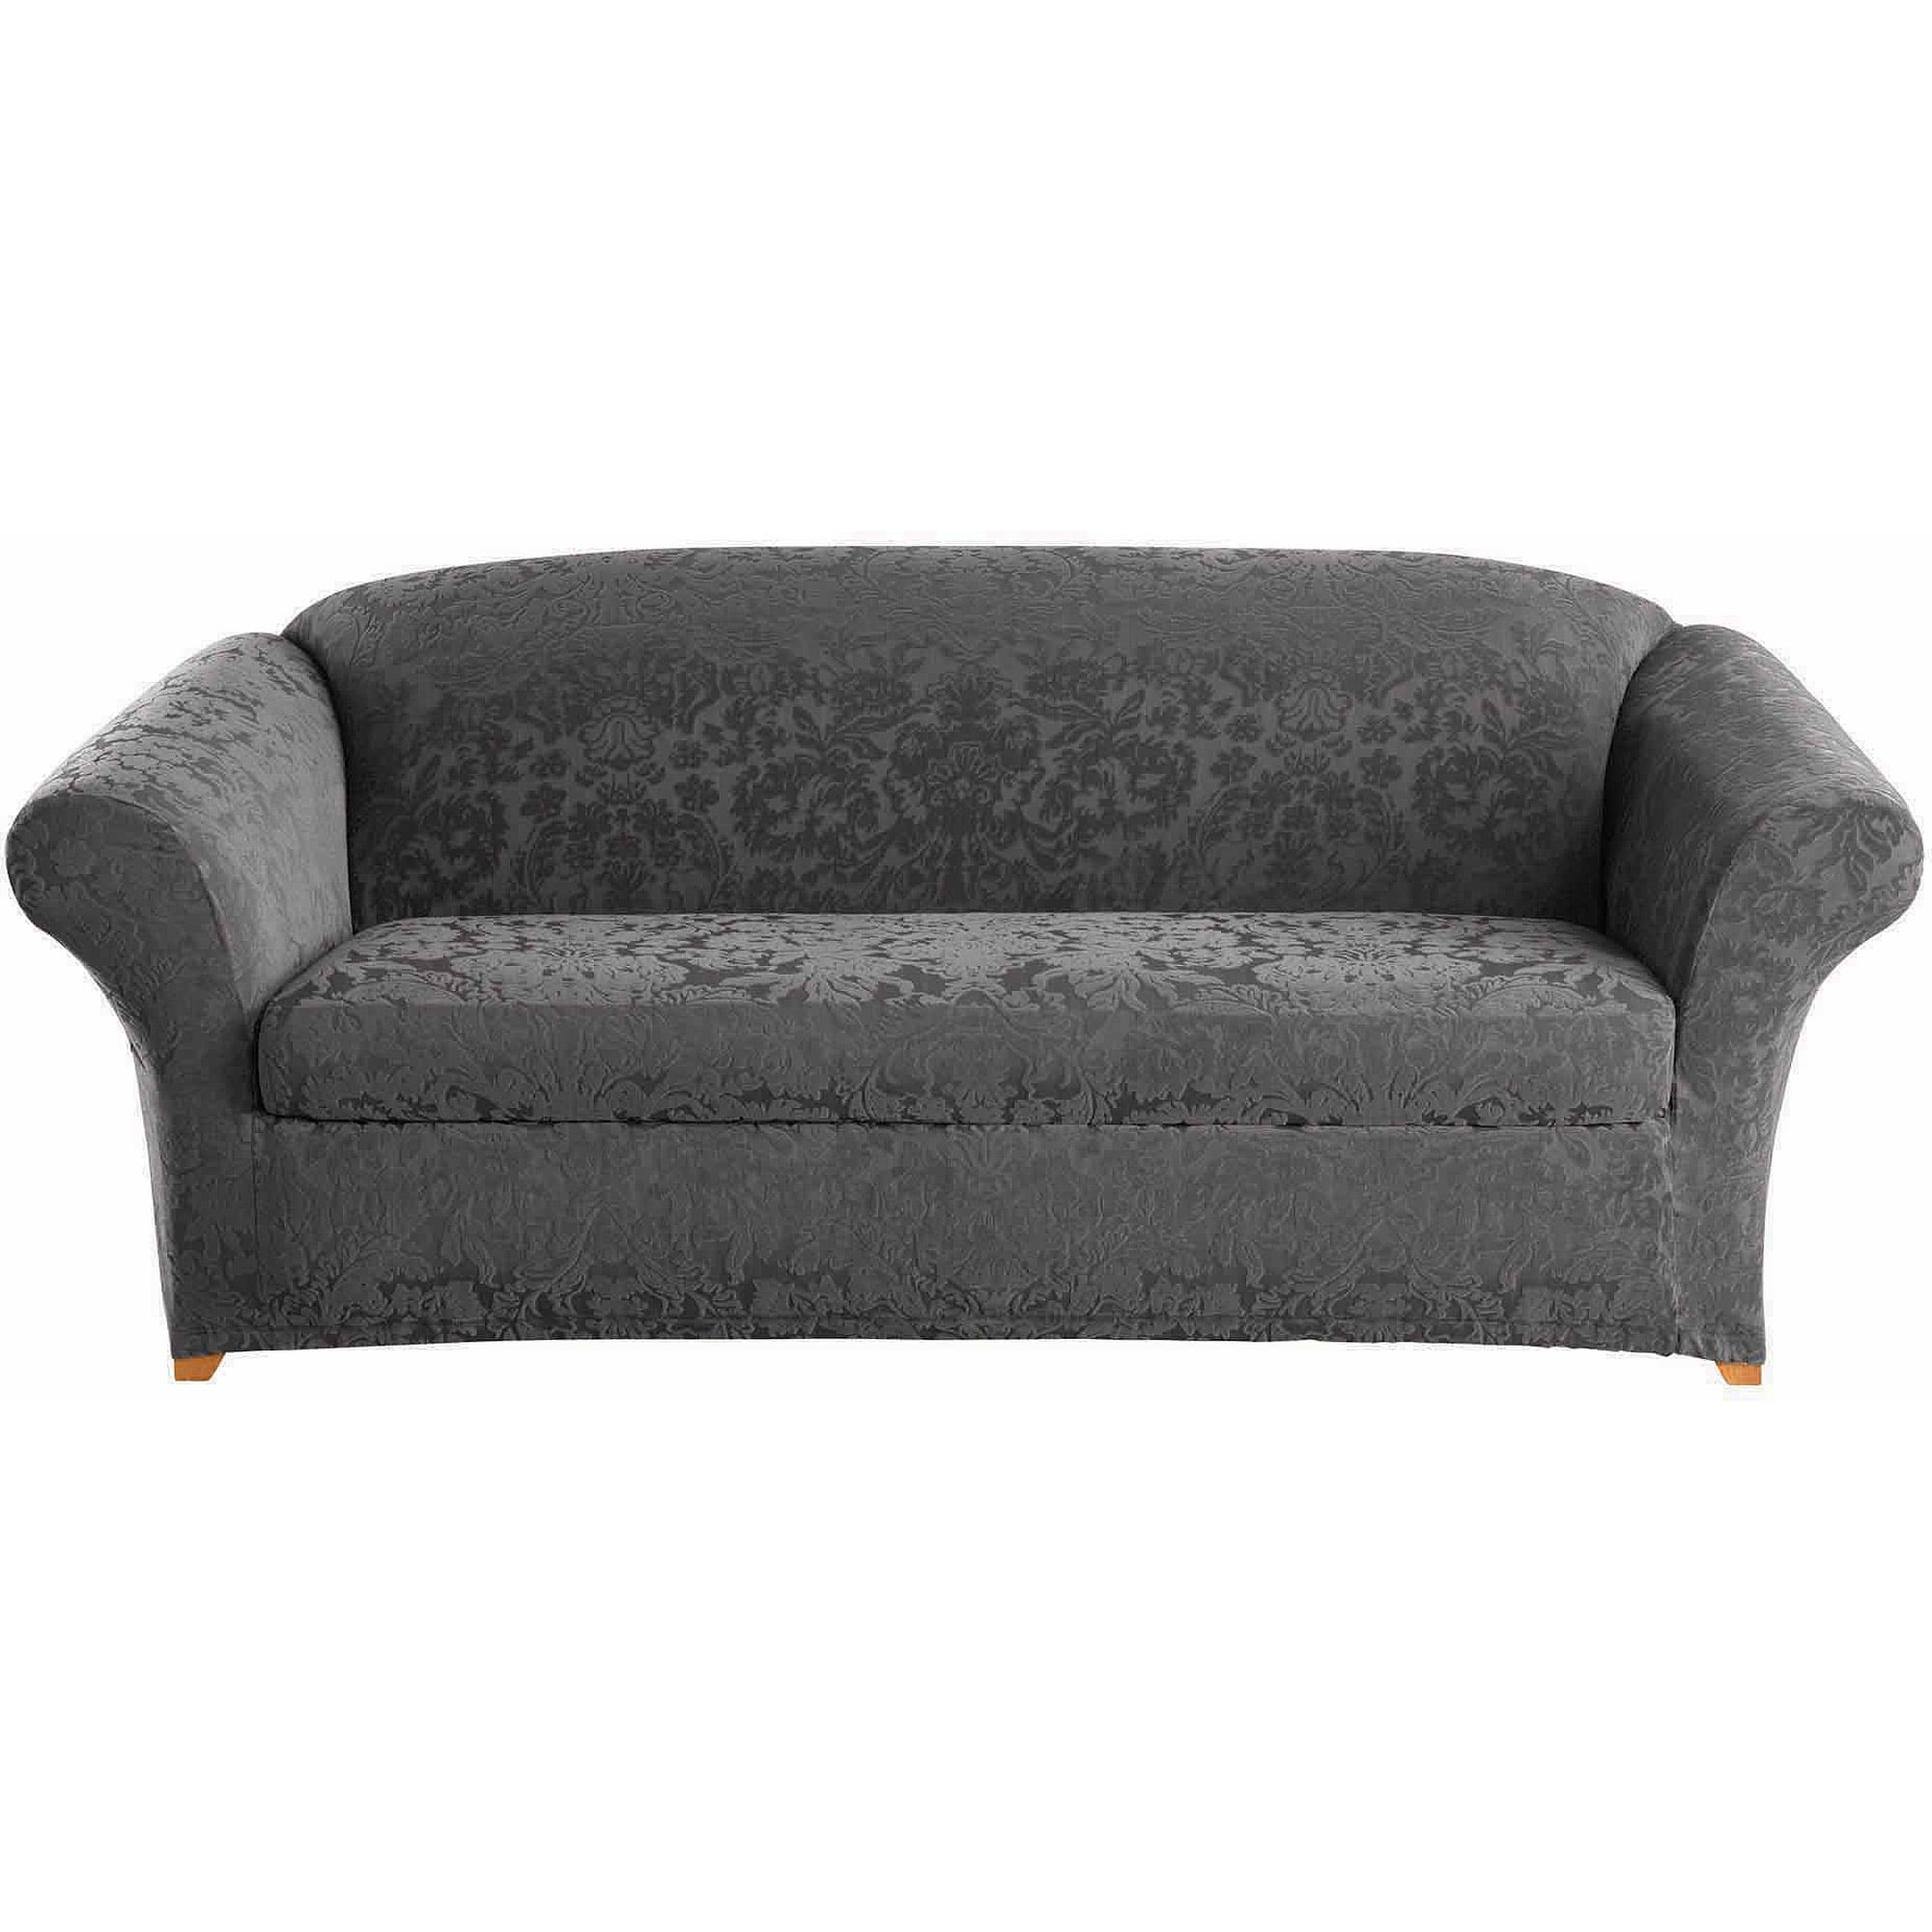 Mushroom1 Seater Surefit Stretch Slipcover Jacquard Damask Sofa Couch Cover 